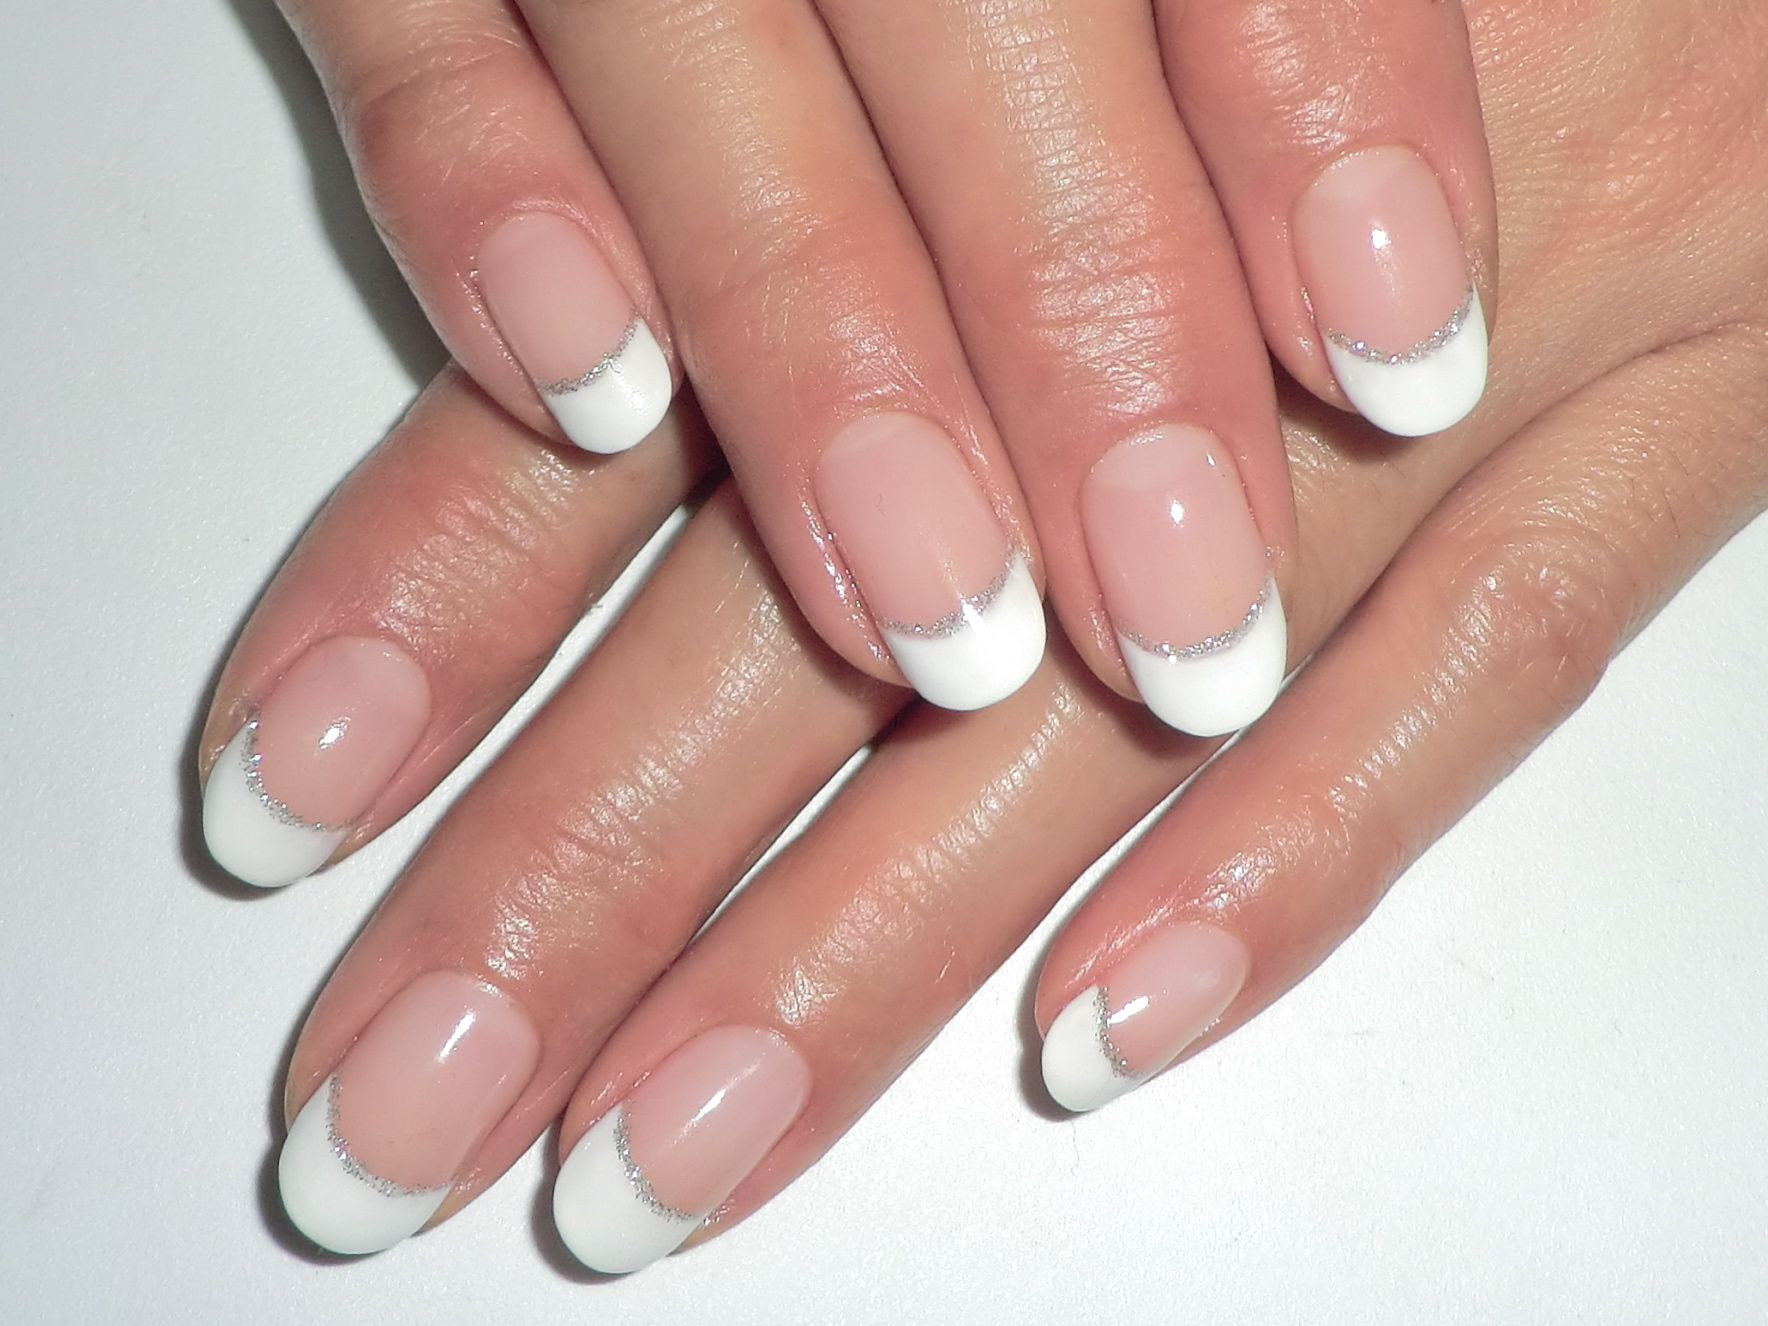 Round Tip Nail Designs
 Rounded French Tips With Silver Glitter Bands From Yucca